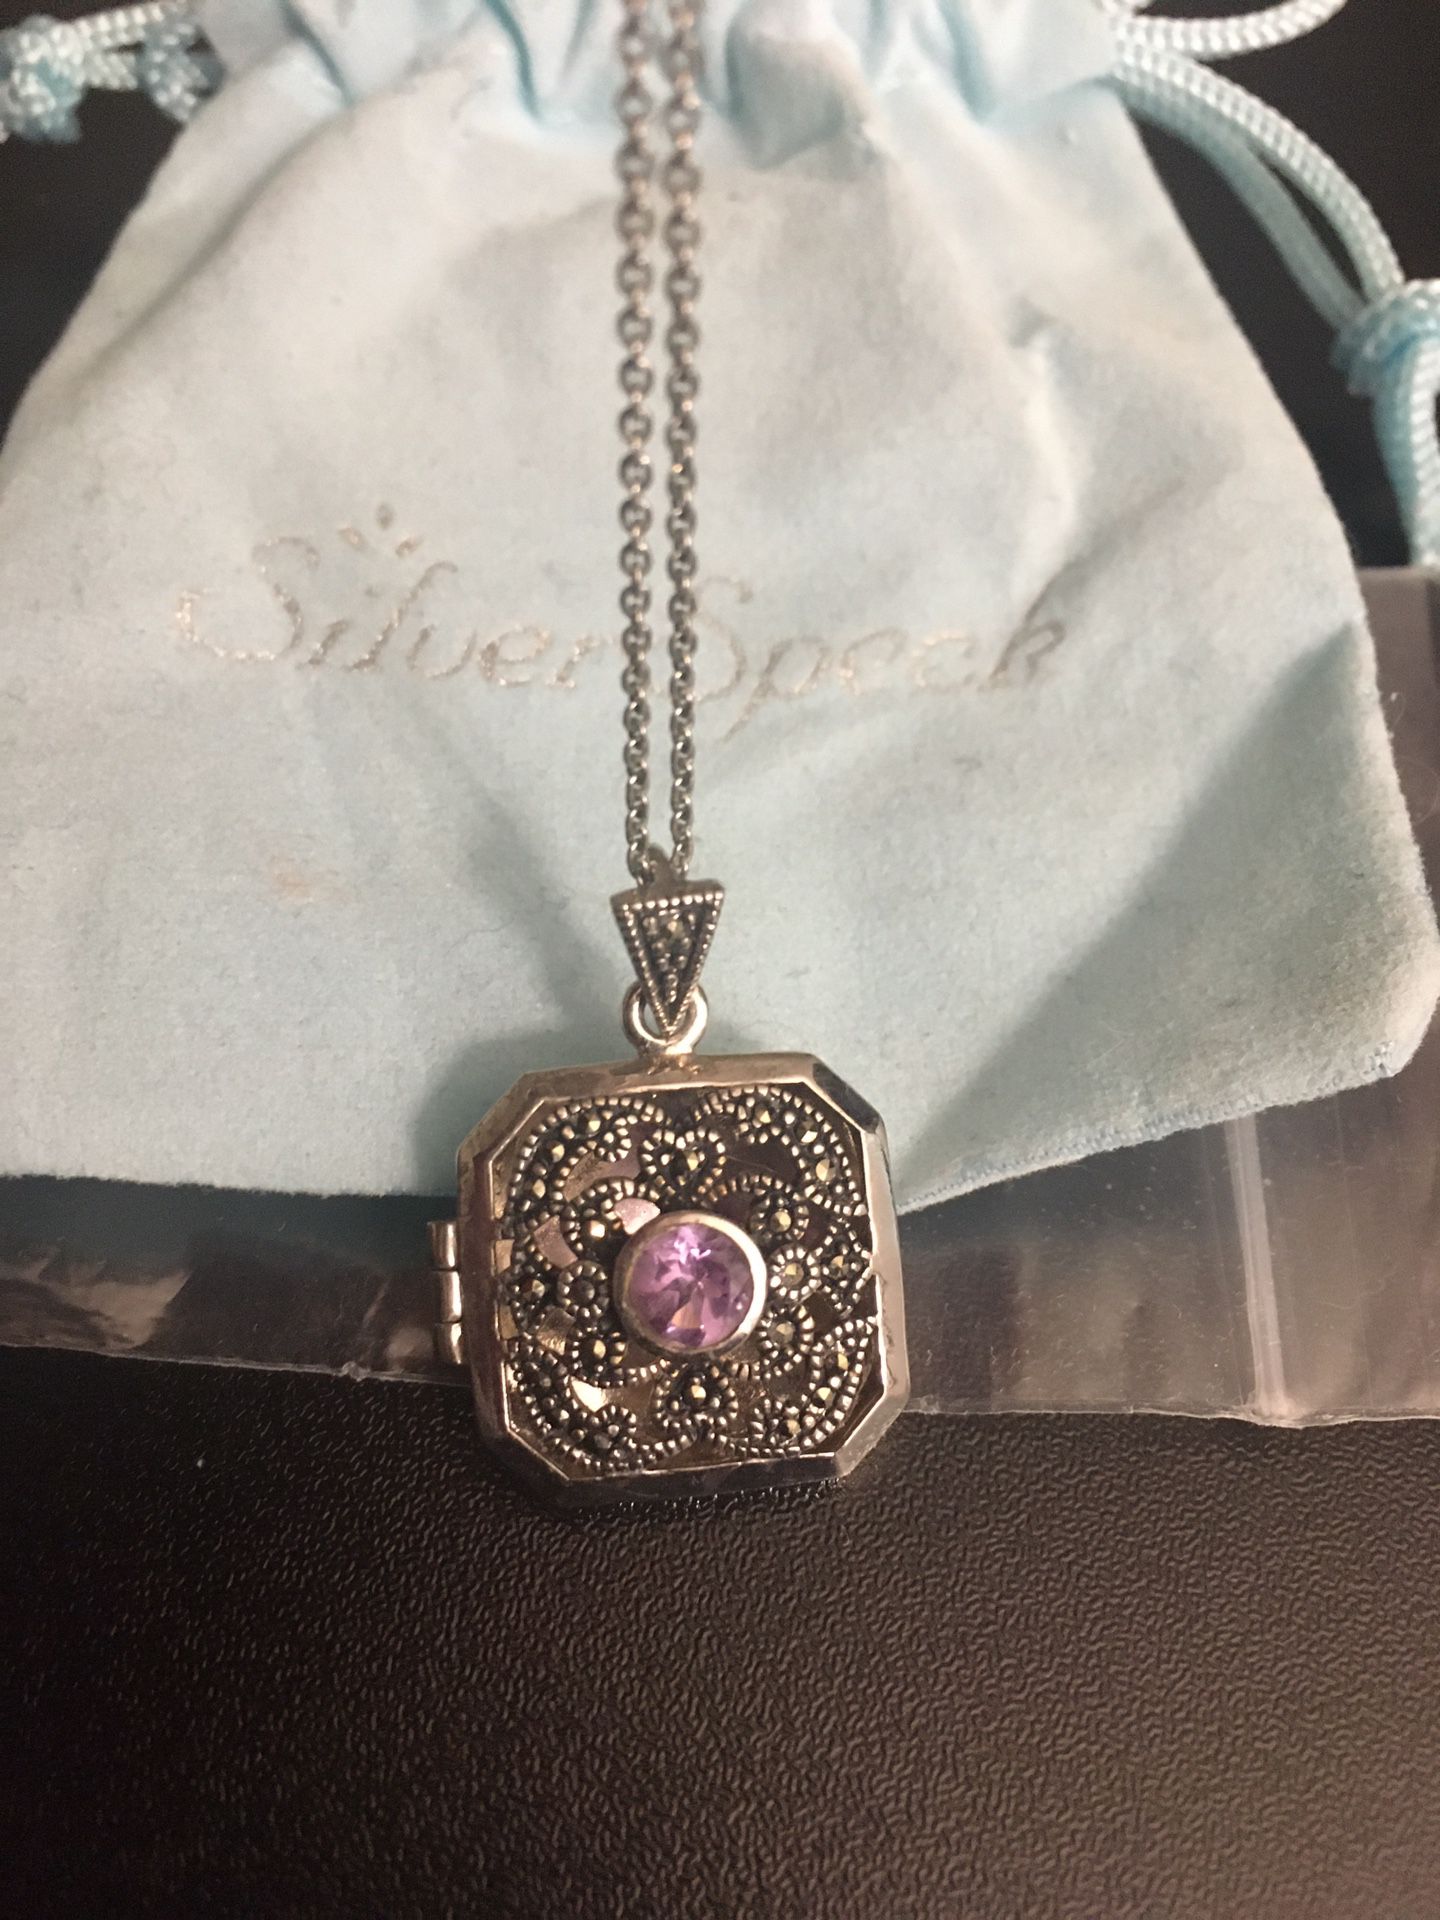 Antique Amethyst Locket Sterling Silver 16” Chain Pendant Necklace ($55 OBO, Priceless!!)